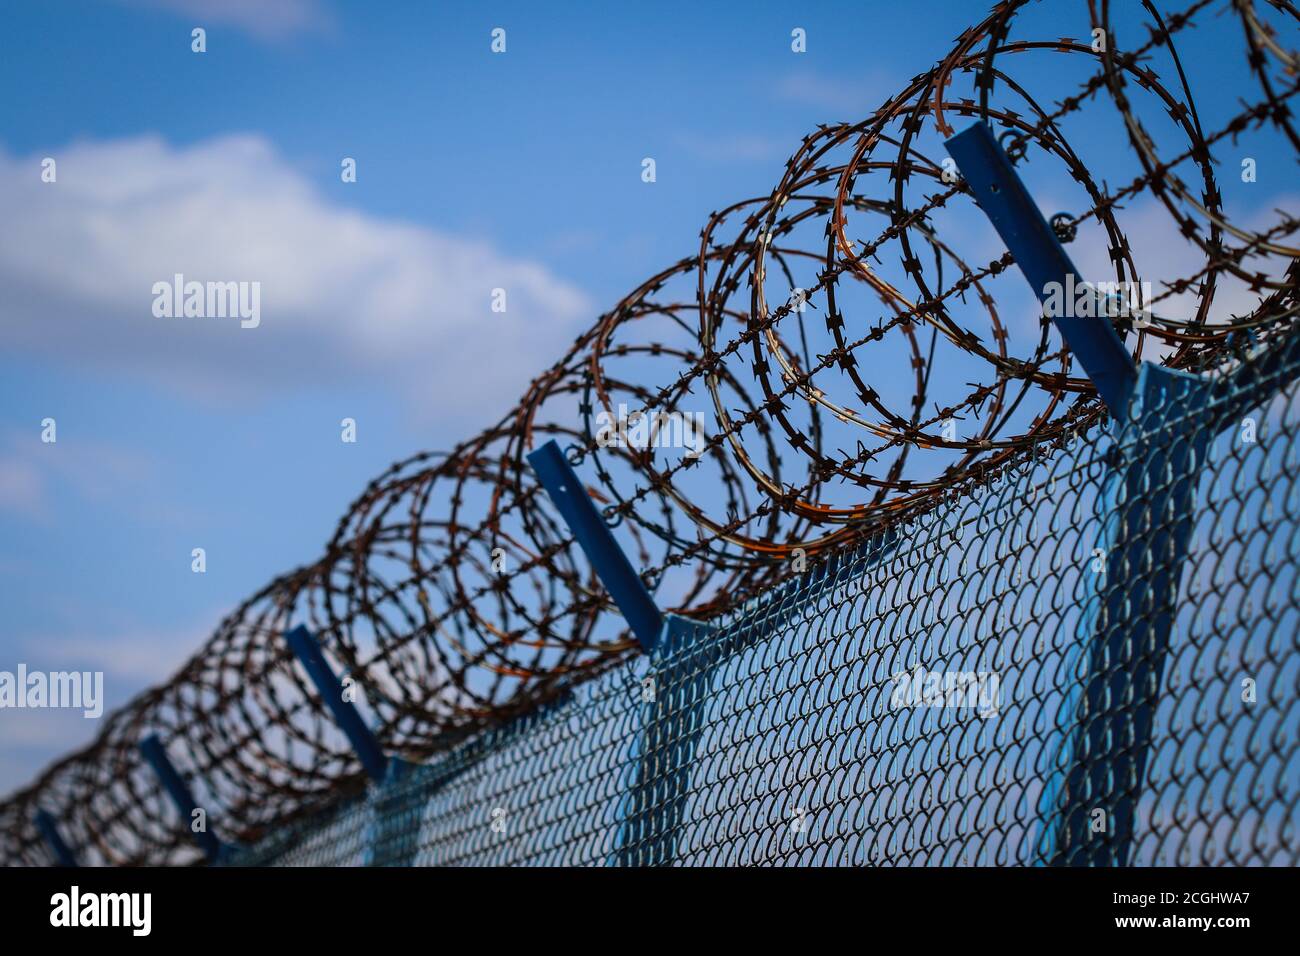 Barbed wire on top of metal mesh netting fence enclosing airport against cloudy sky Stock Photo